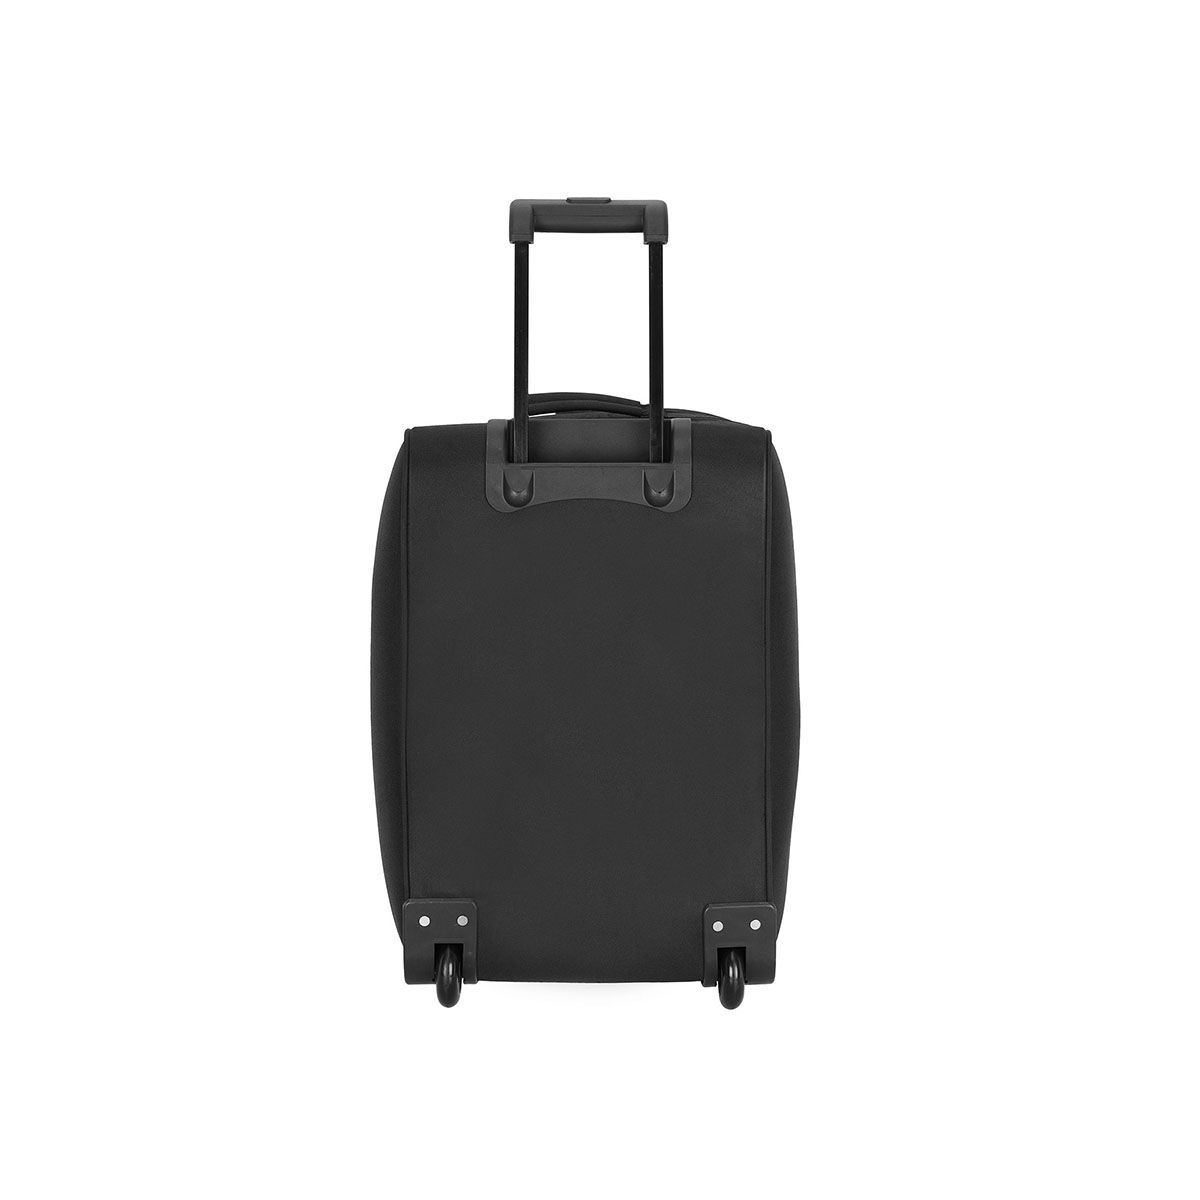 Details more than 79 small bag with wheels - in.duhocakina